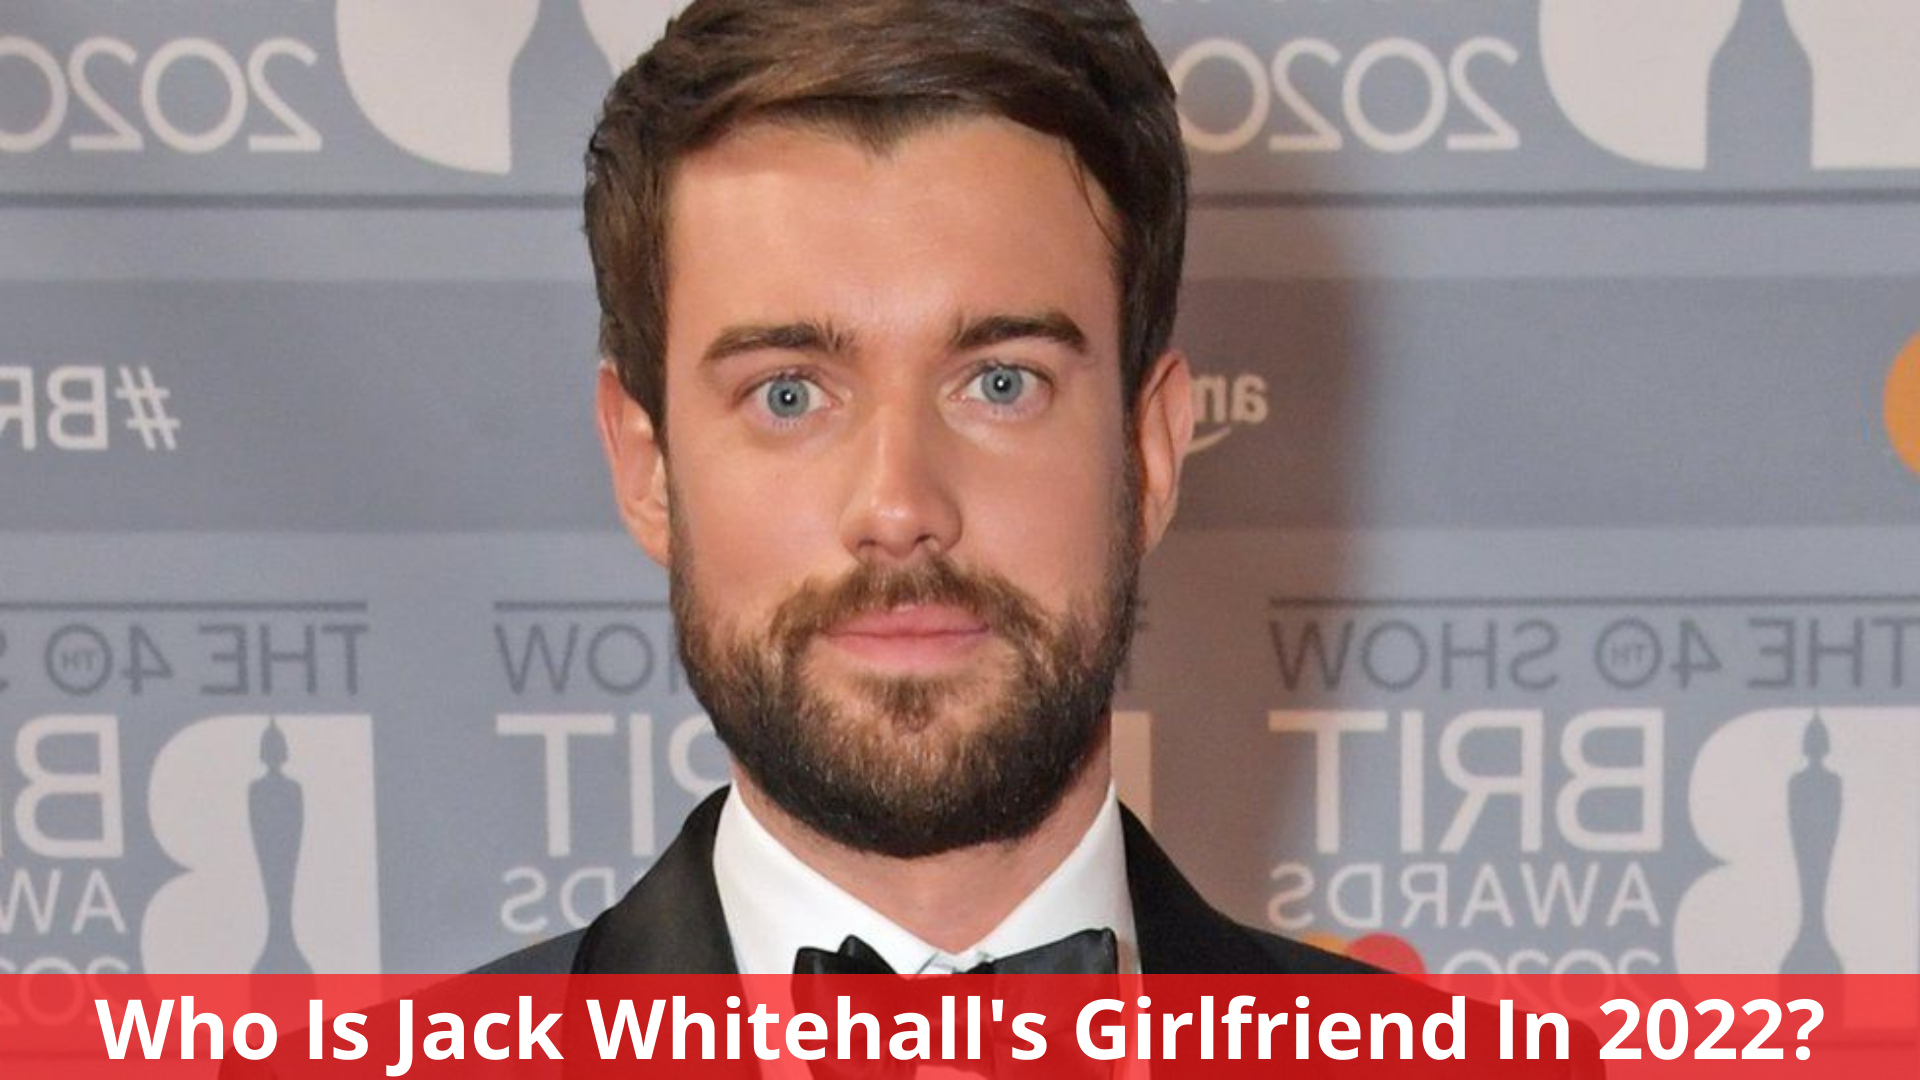 Who Is Jack Whitehall's Girlfriend In 2022?